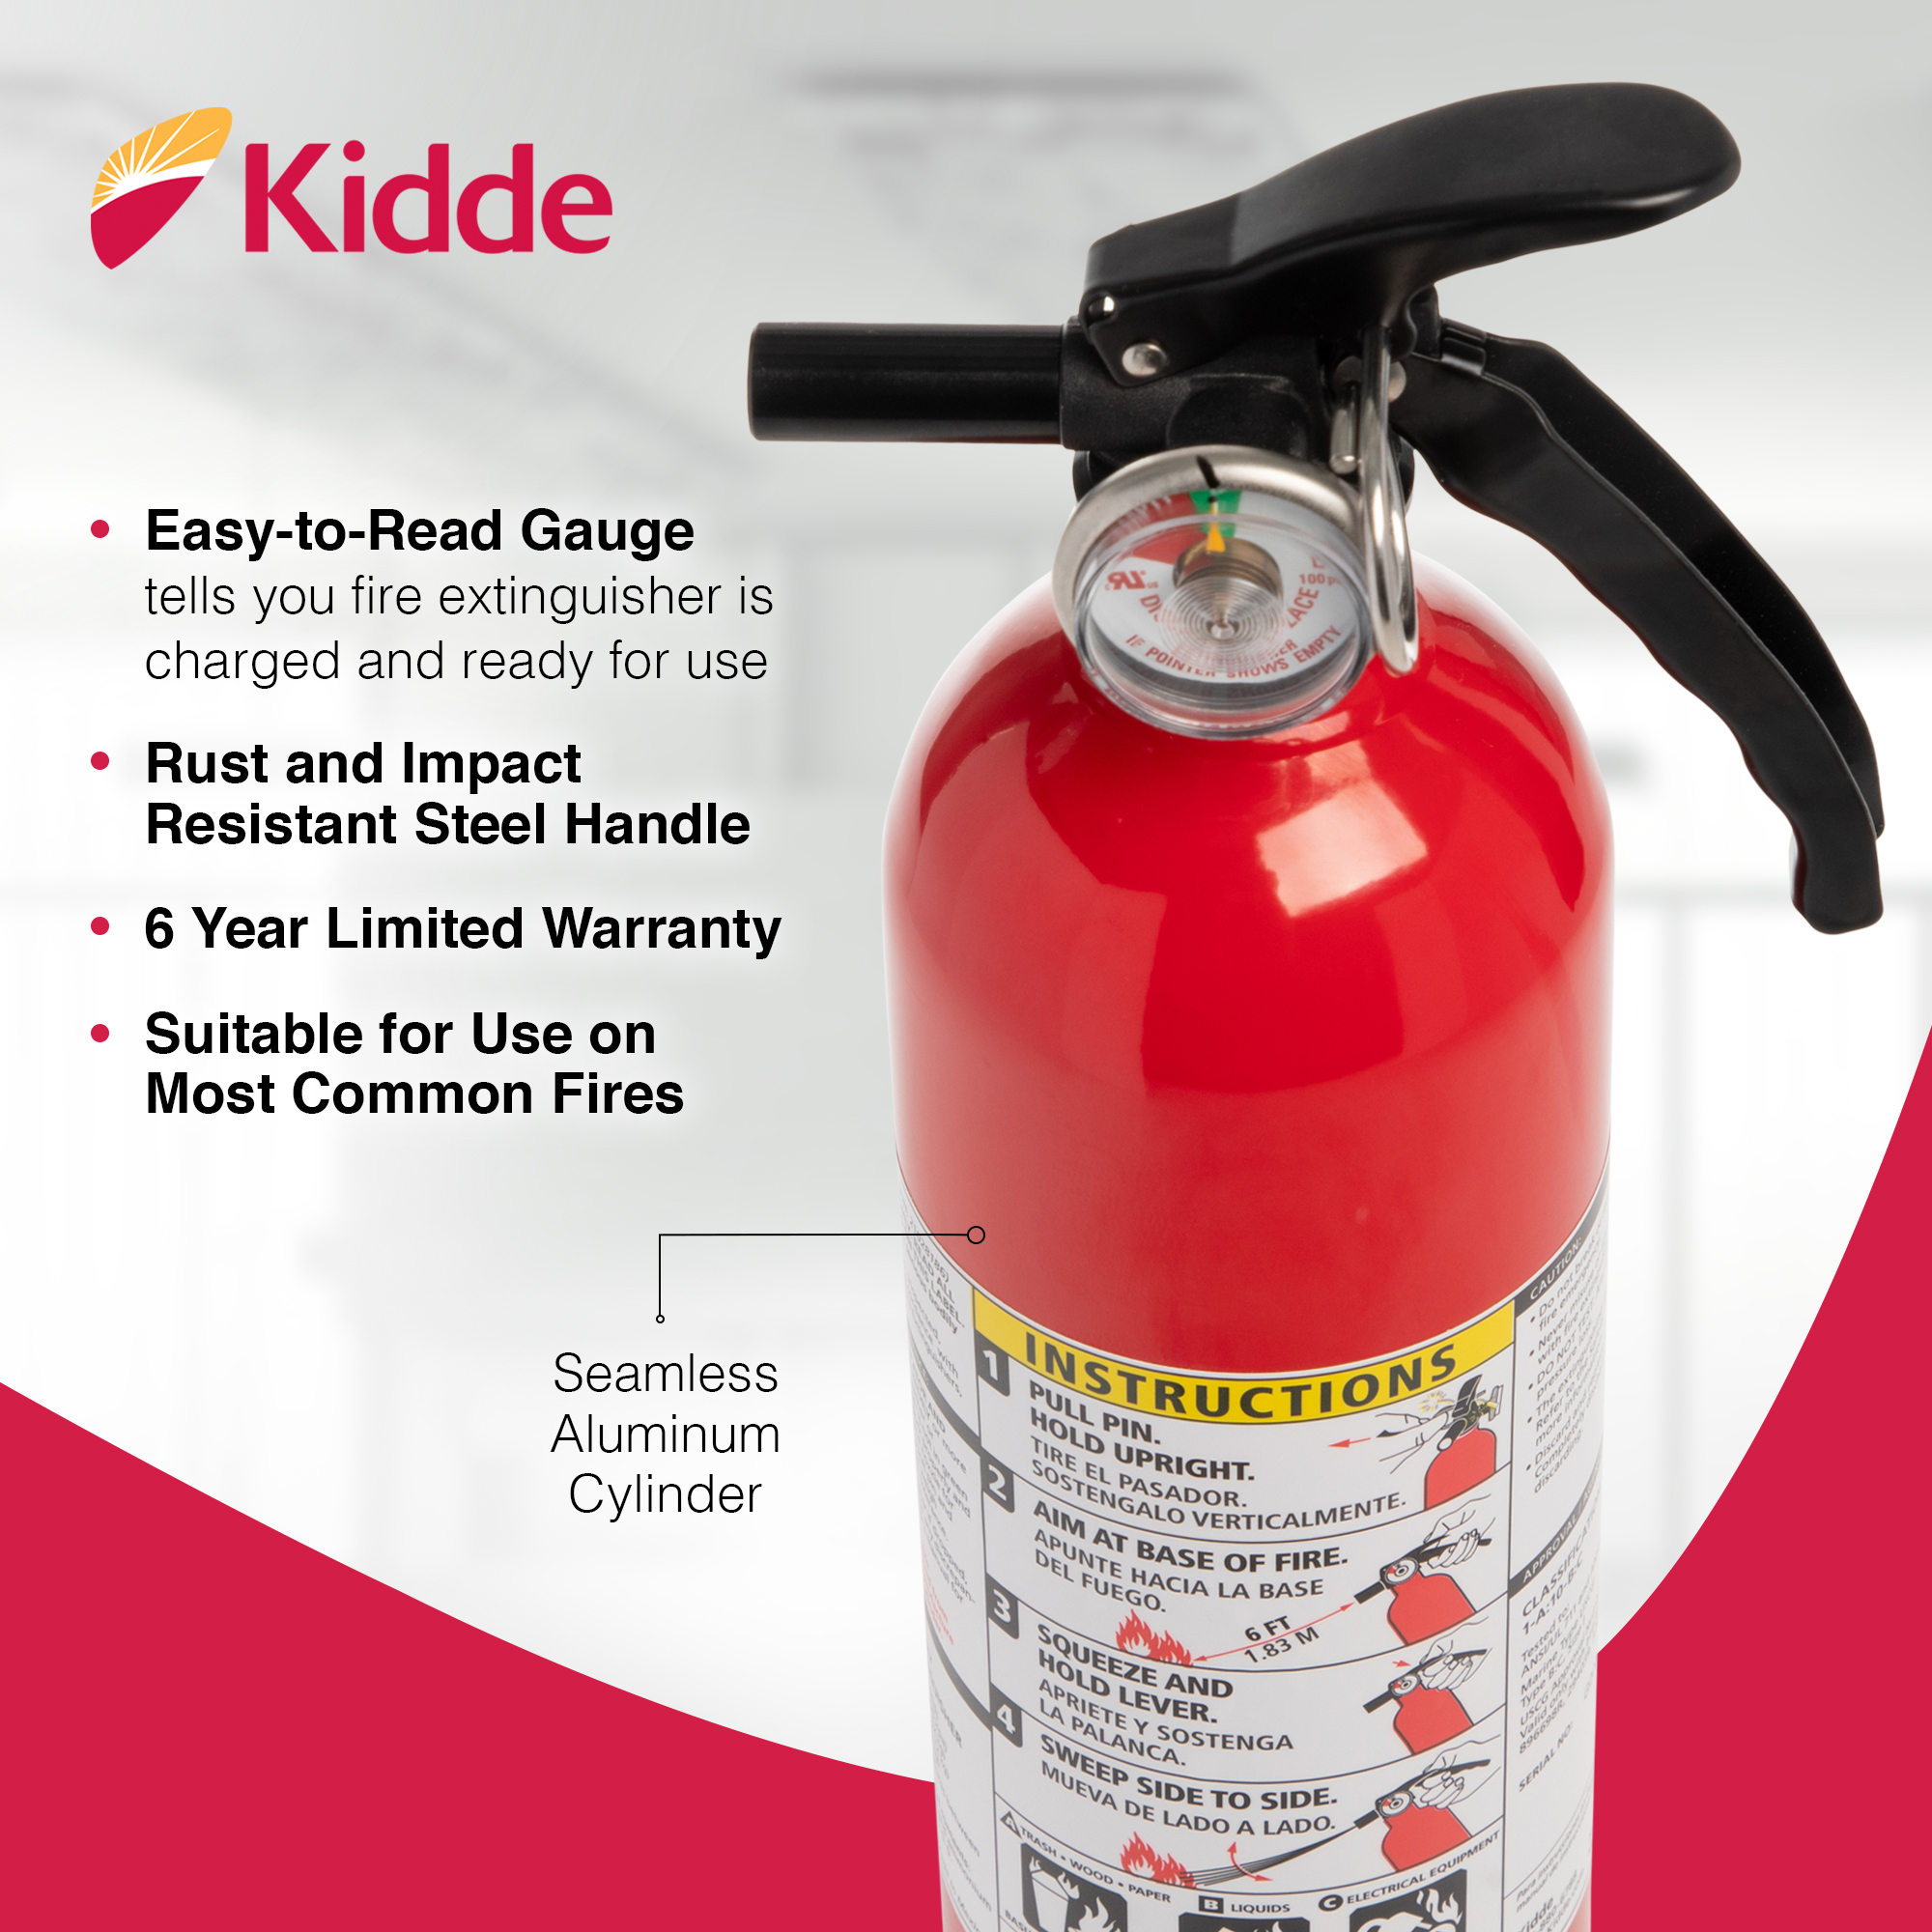 Kidde Multipurpose Home Fire Extinguisher, UL Rated 1-A:10-B:C, Model KD82-110ABC - image 3 of 8